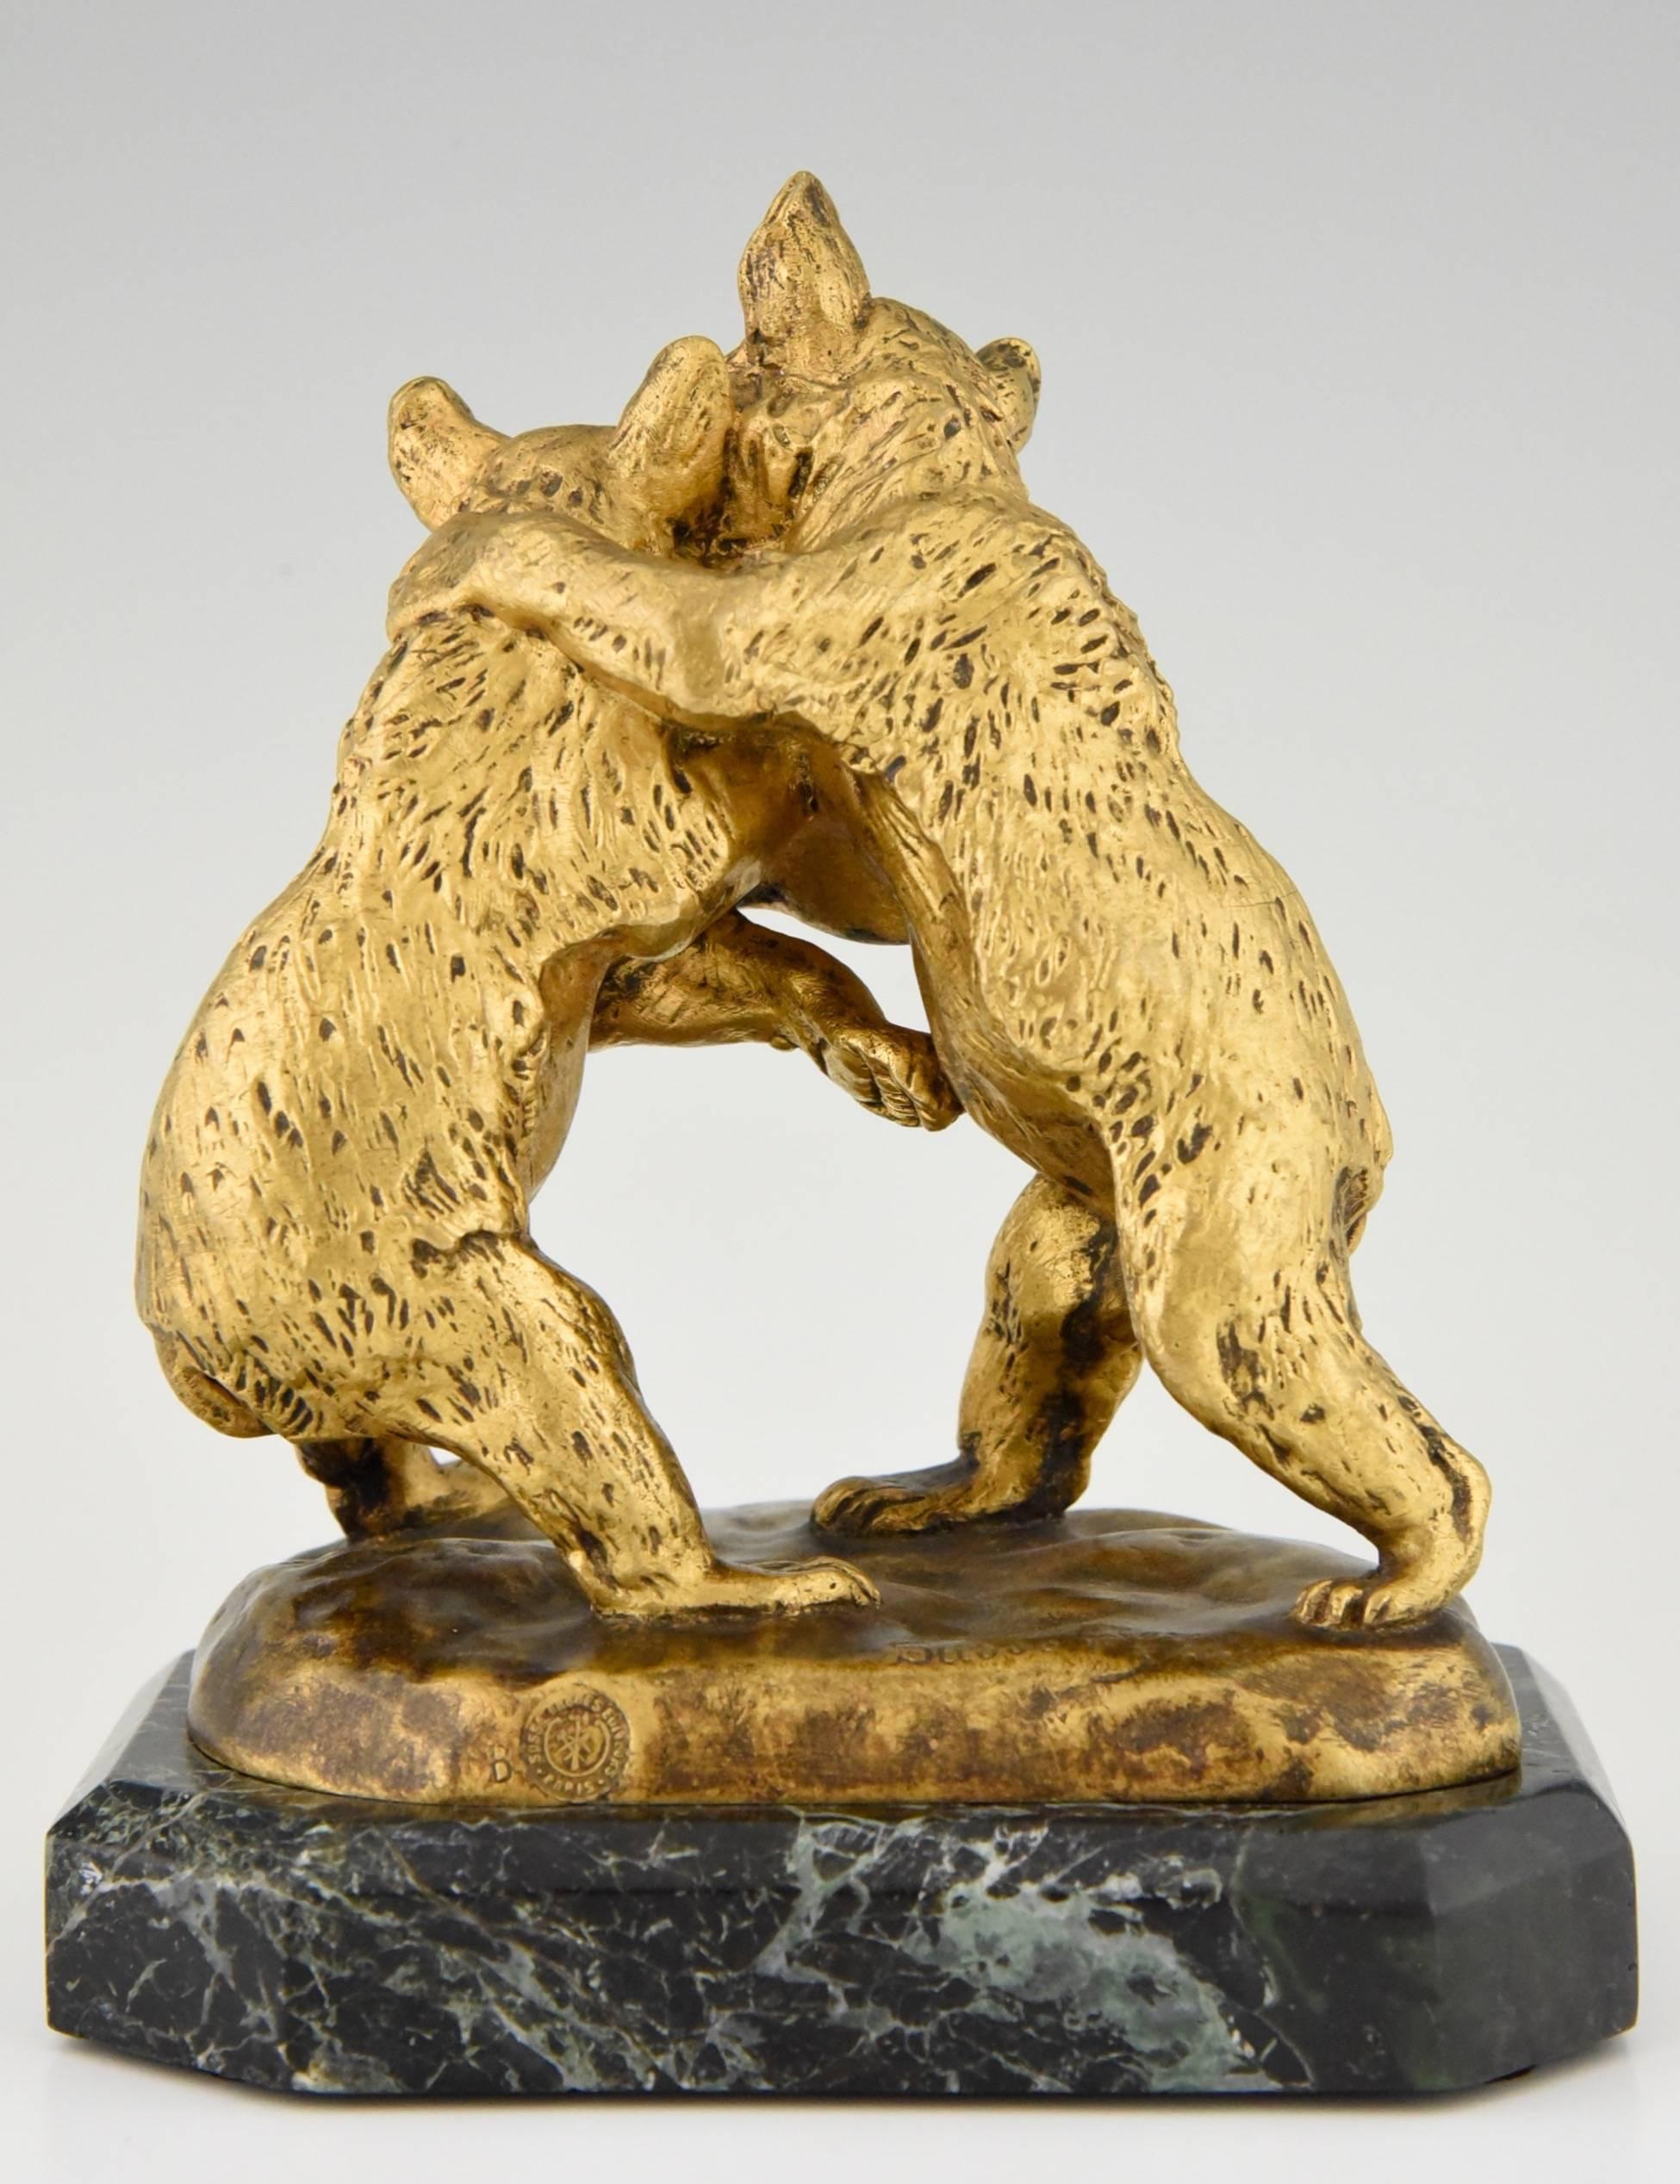 Romantic Antique Bronze sculpture of Two Young Bears Playing by Victor Peter